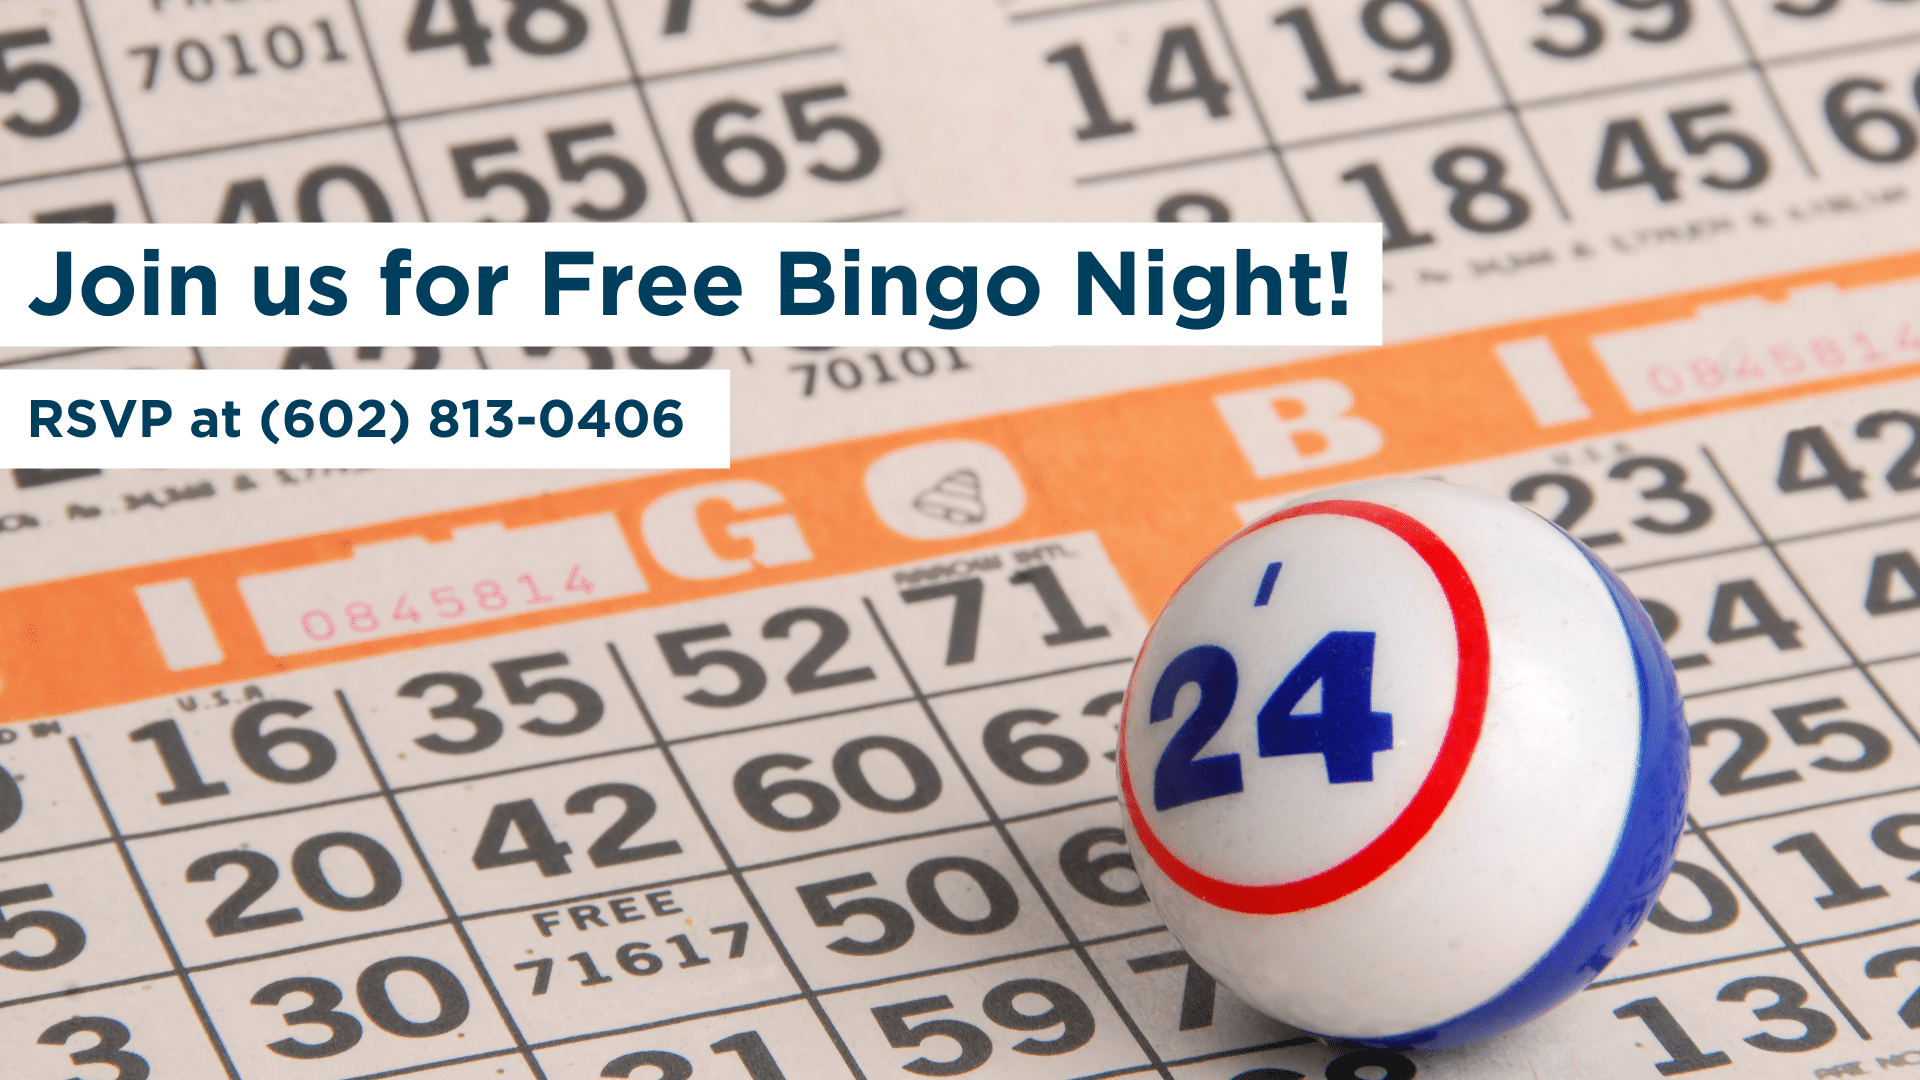 Join us for a FREE Bingo Night!